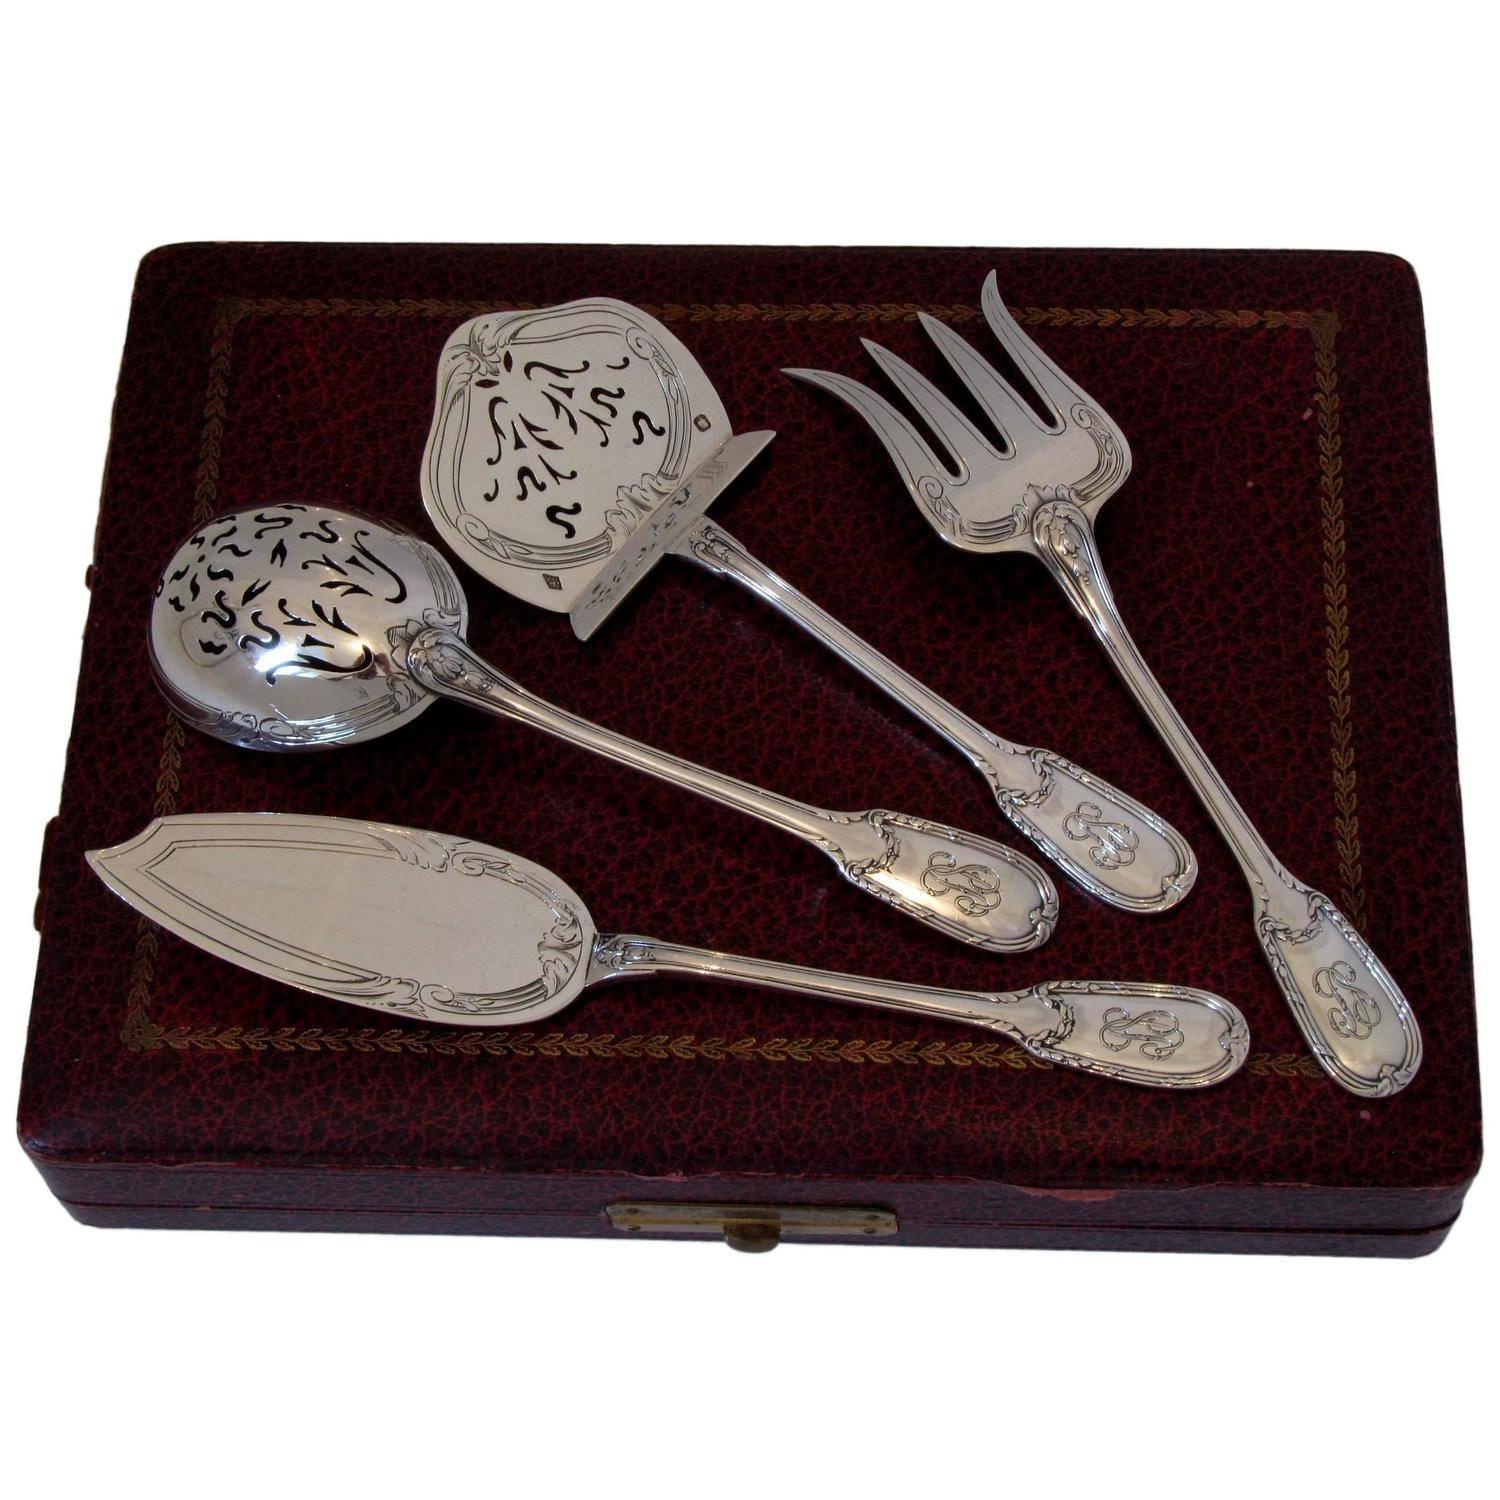 Christofle Rare French All Sterling Silver Dessert Hors D'oeuvre Set Four-Pc Box 3